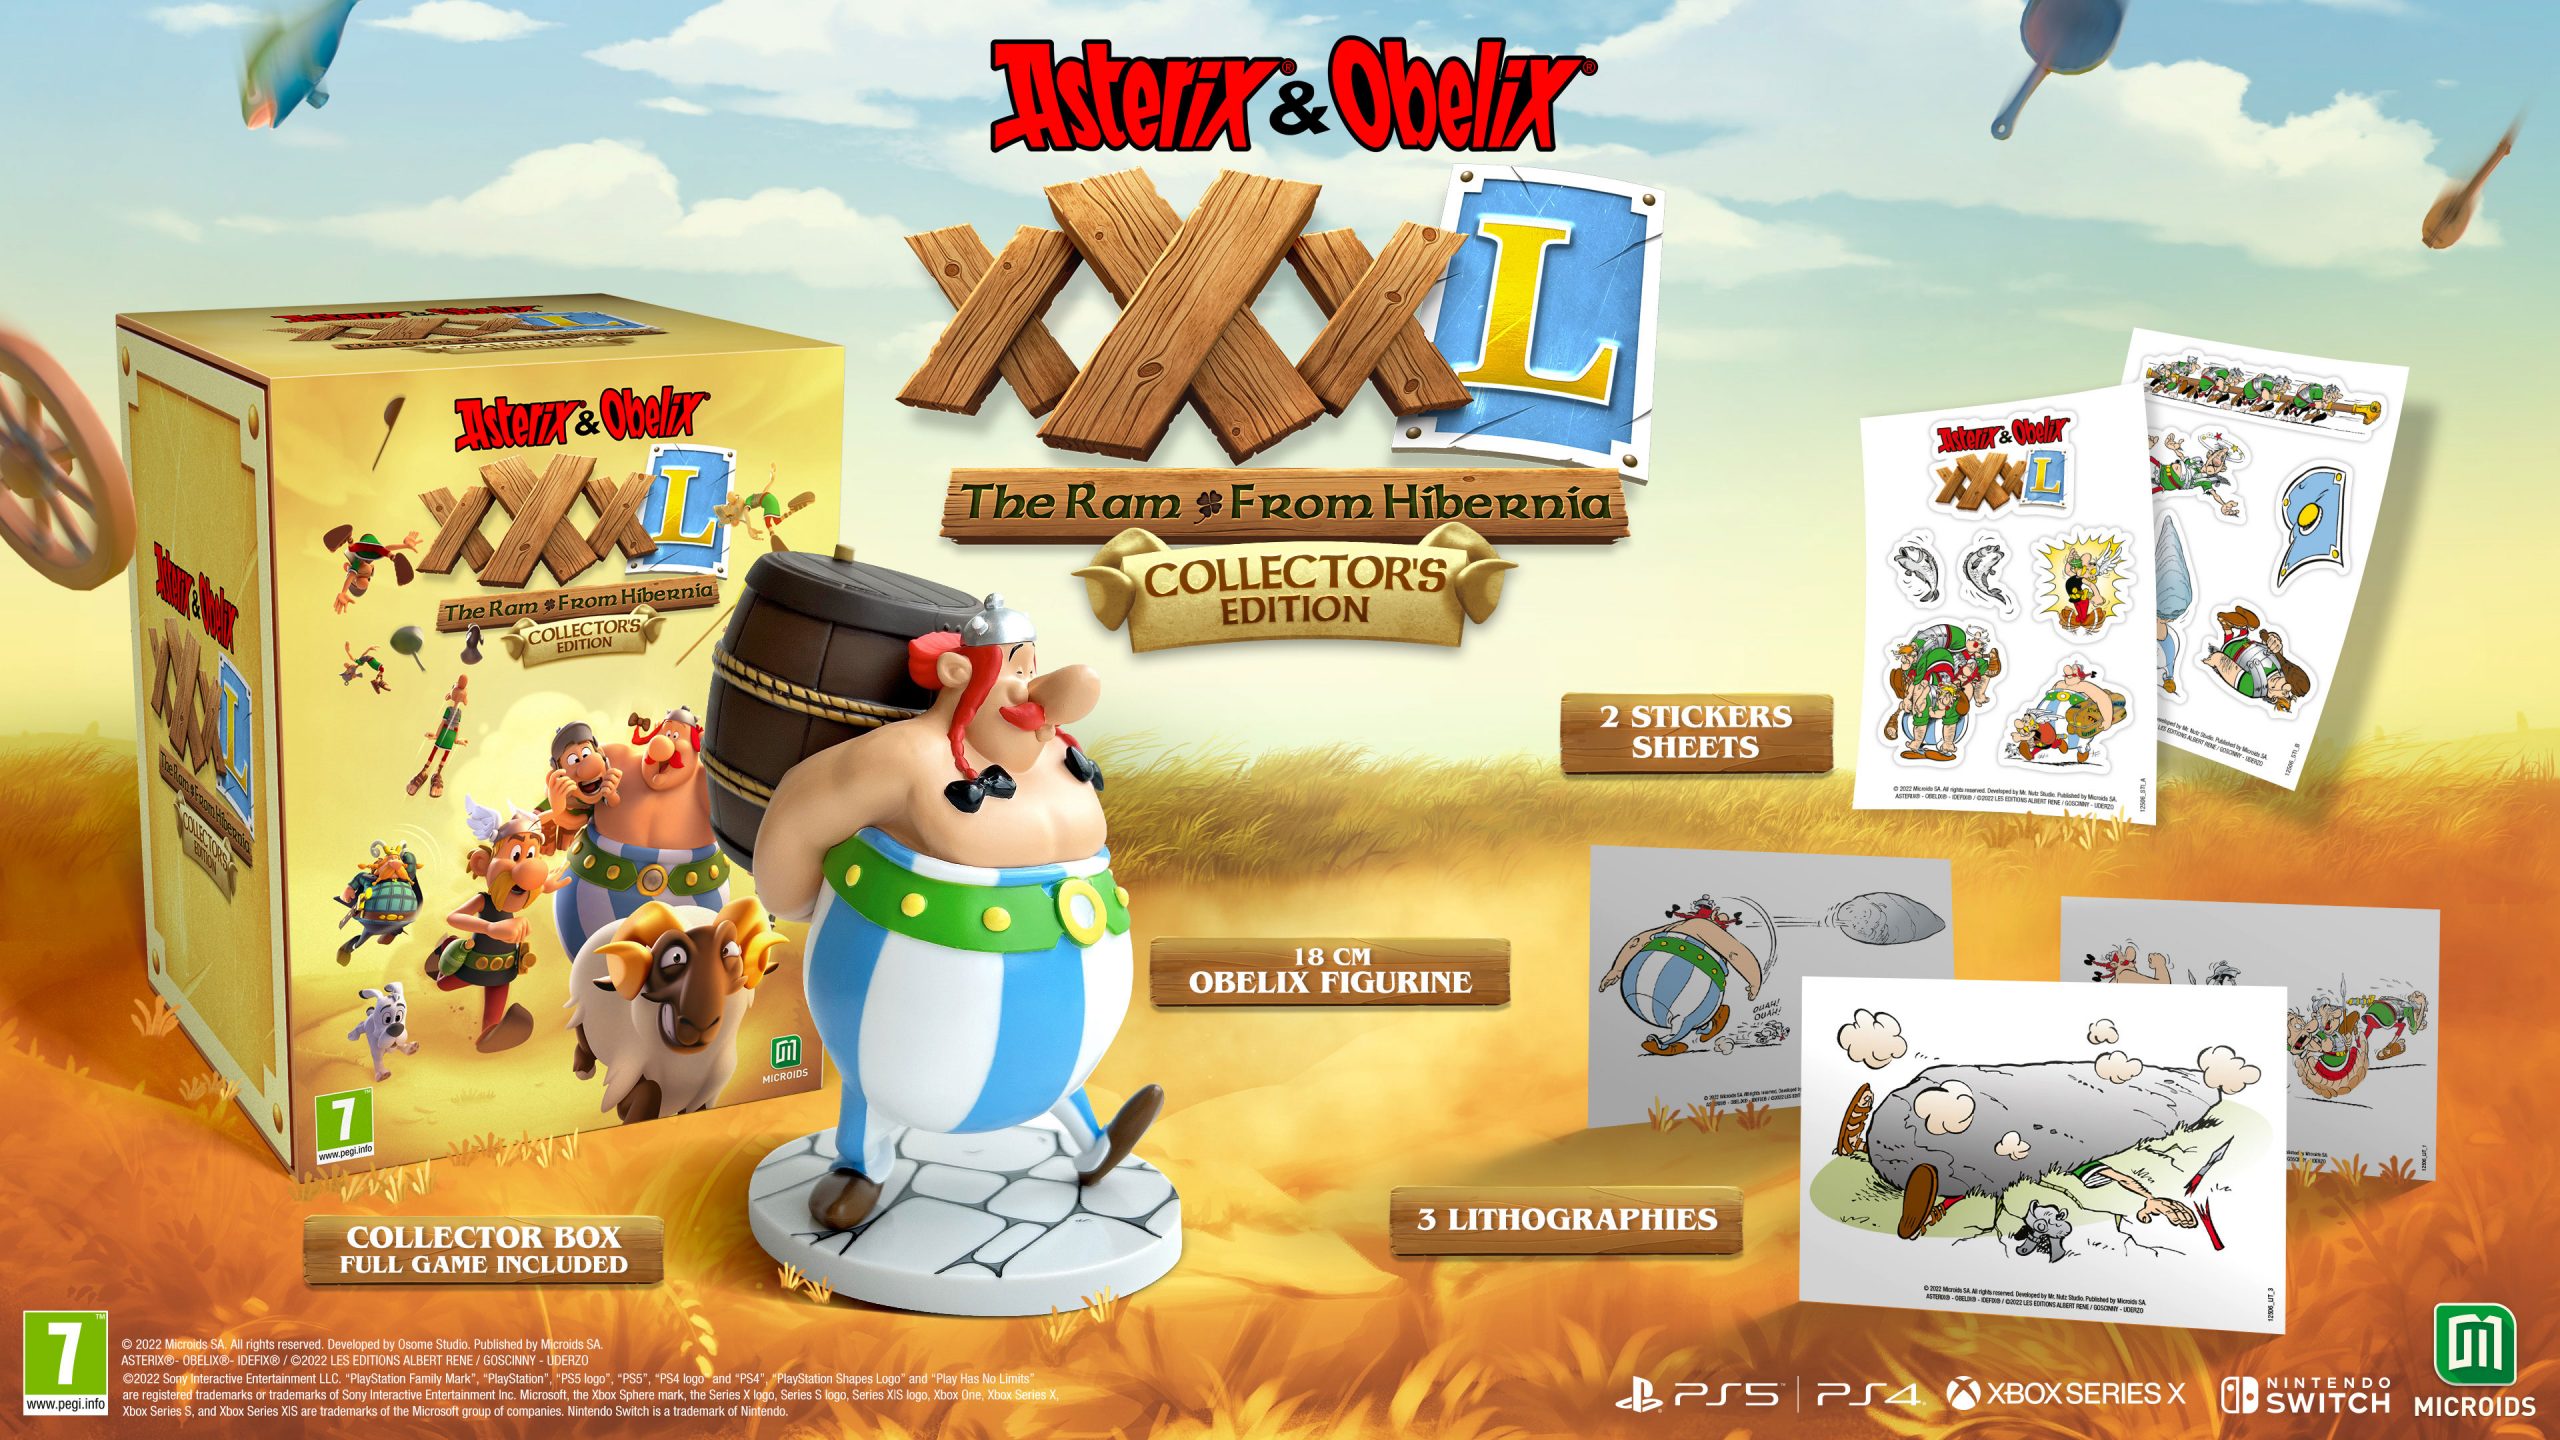 Asterix & Obelix XXXL: The Ram From Microids unveils the - Microids